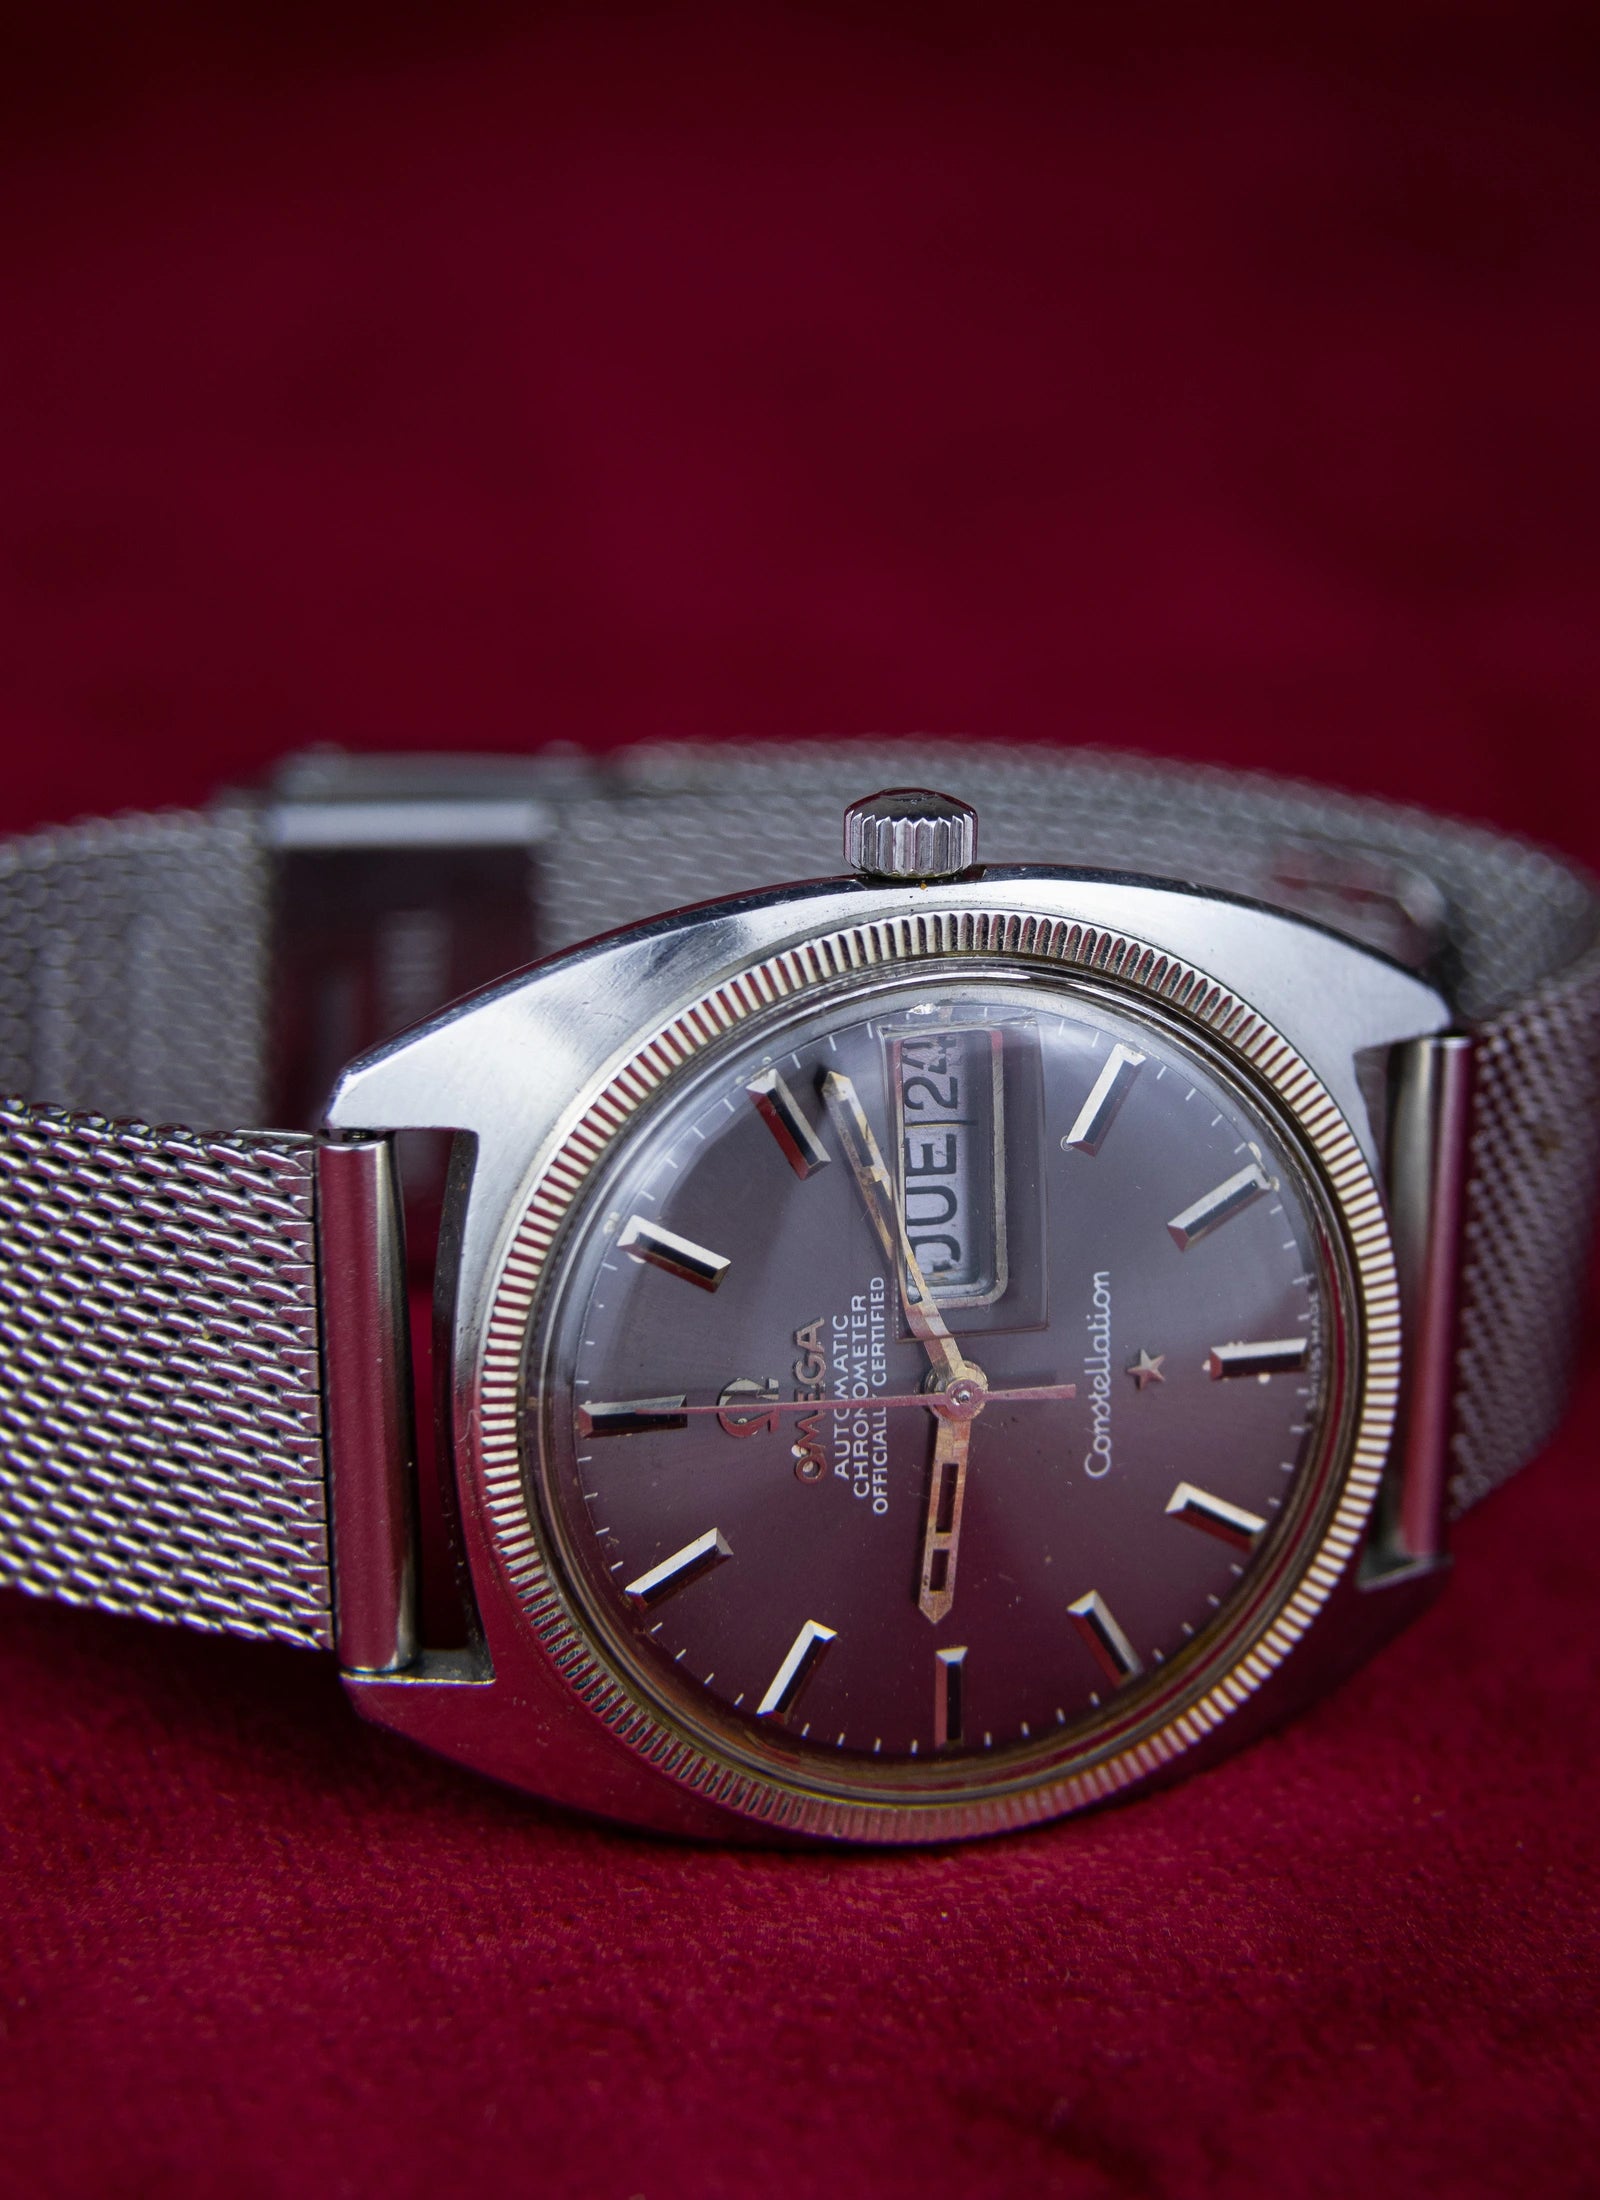 1969 Omega Constellation C-shaped Day-Date 168.029 cal. 751